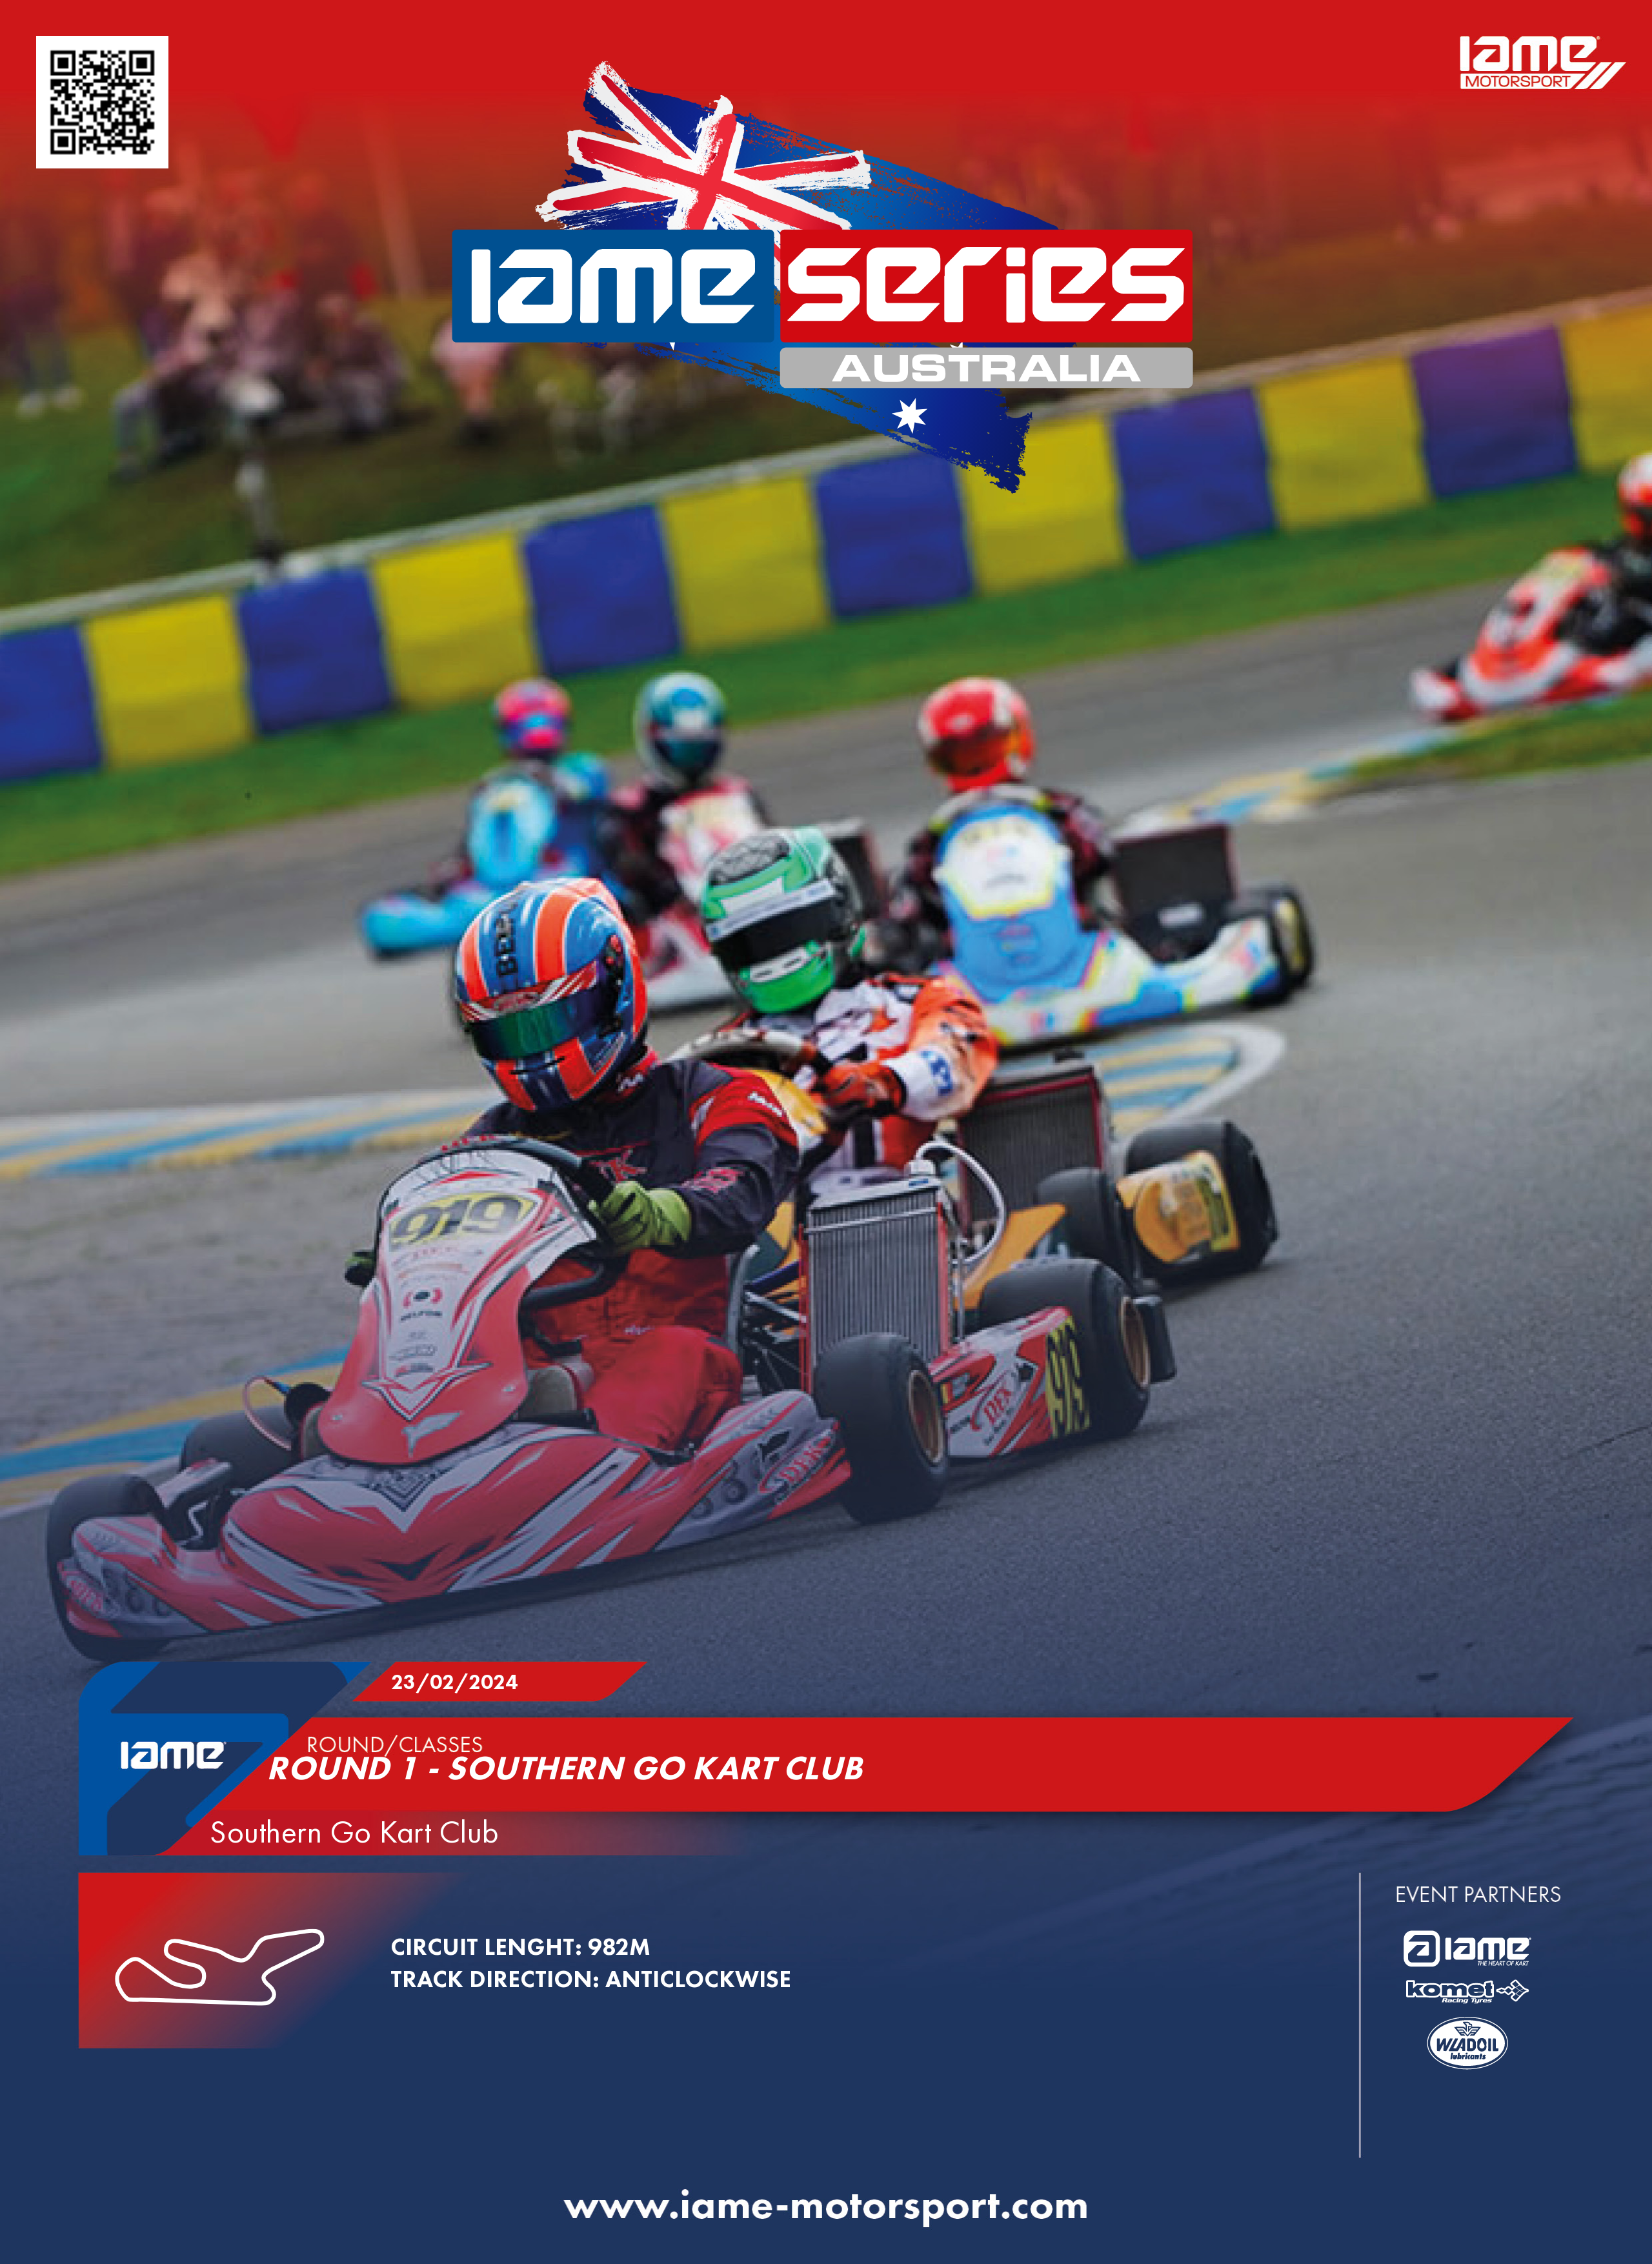 Revving Up Down Under: The Excitement of the IAME Series Australia's Opening Round at Southern Go Kart Club